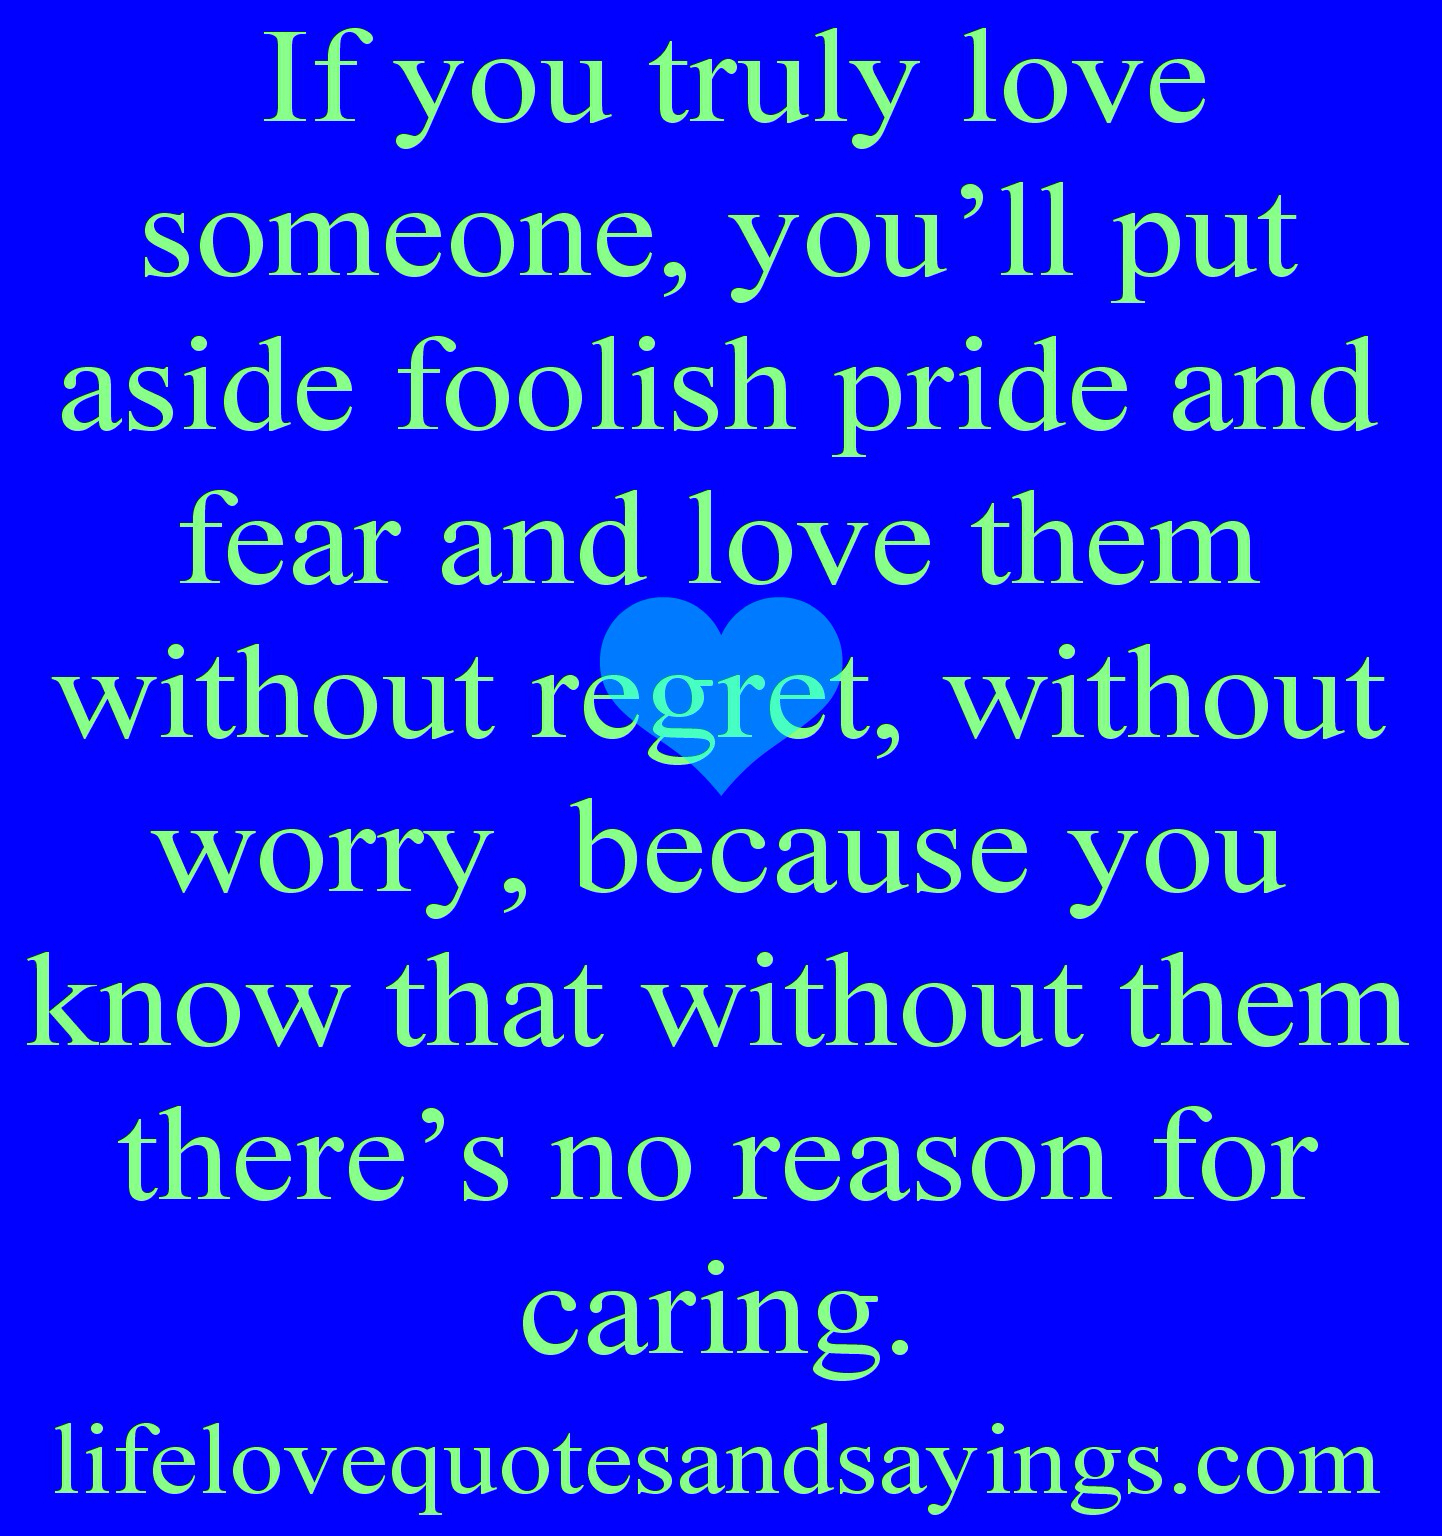 Quotes I Truly Love You Quotesgram